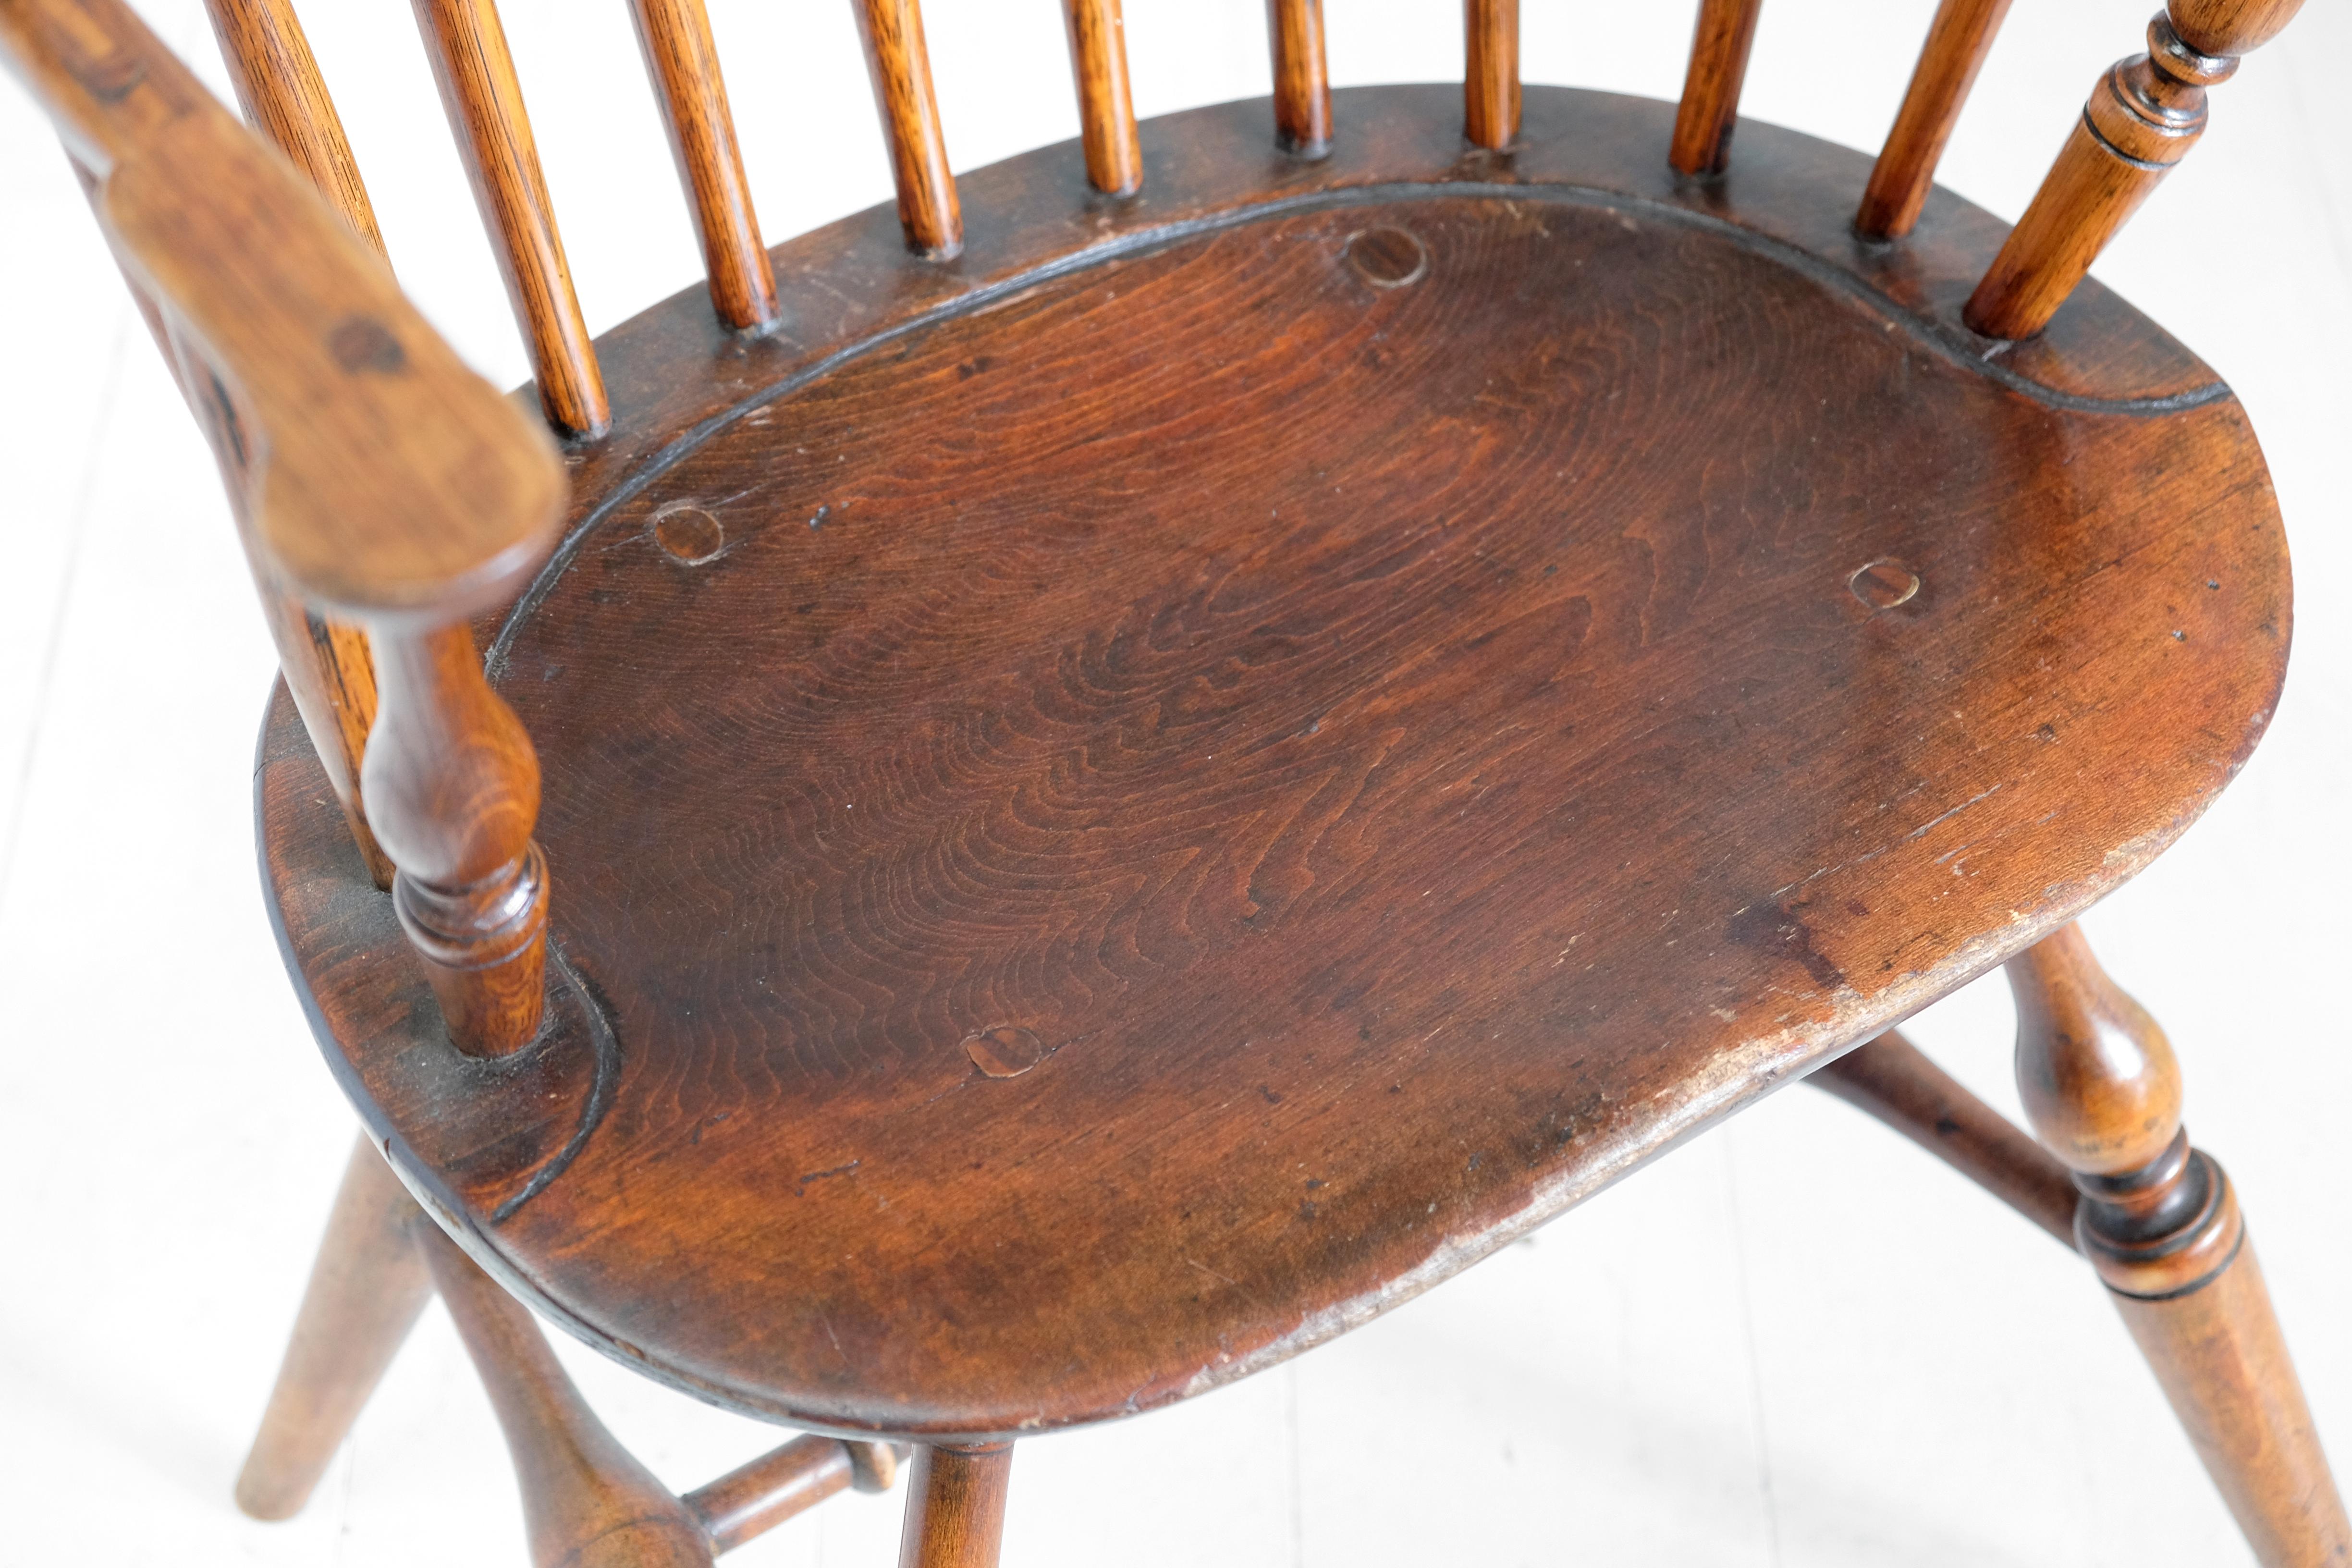 Hand-Crafted American 'Sack Back' Windsor Chair with Provenance, 18th Century, Connecticut For Sale